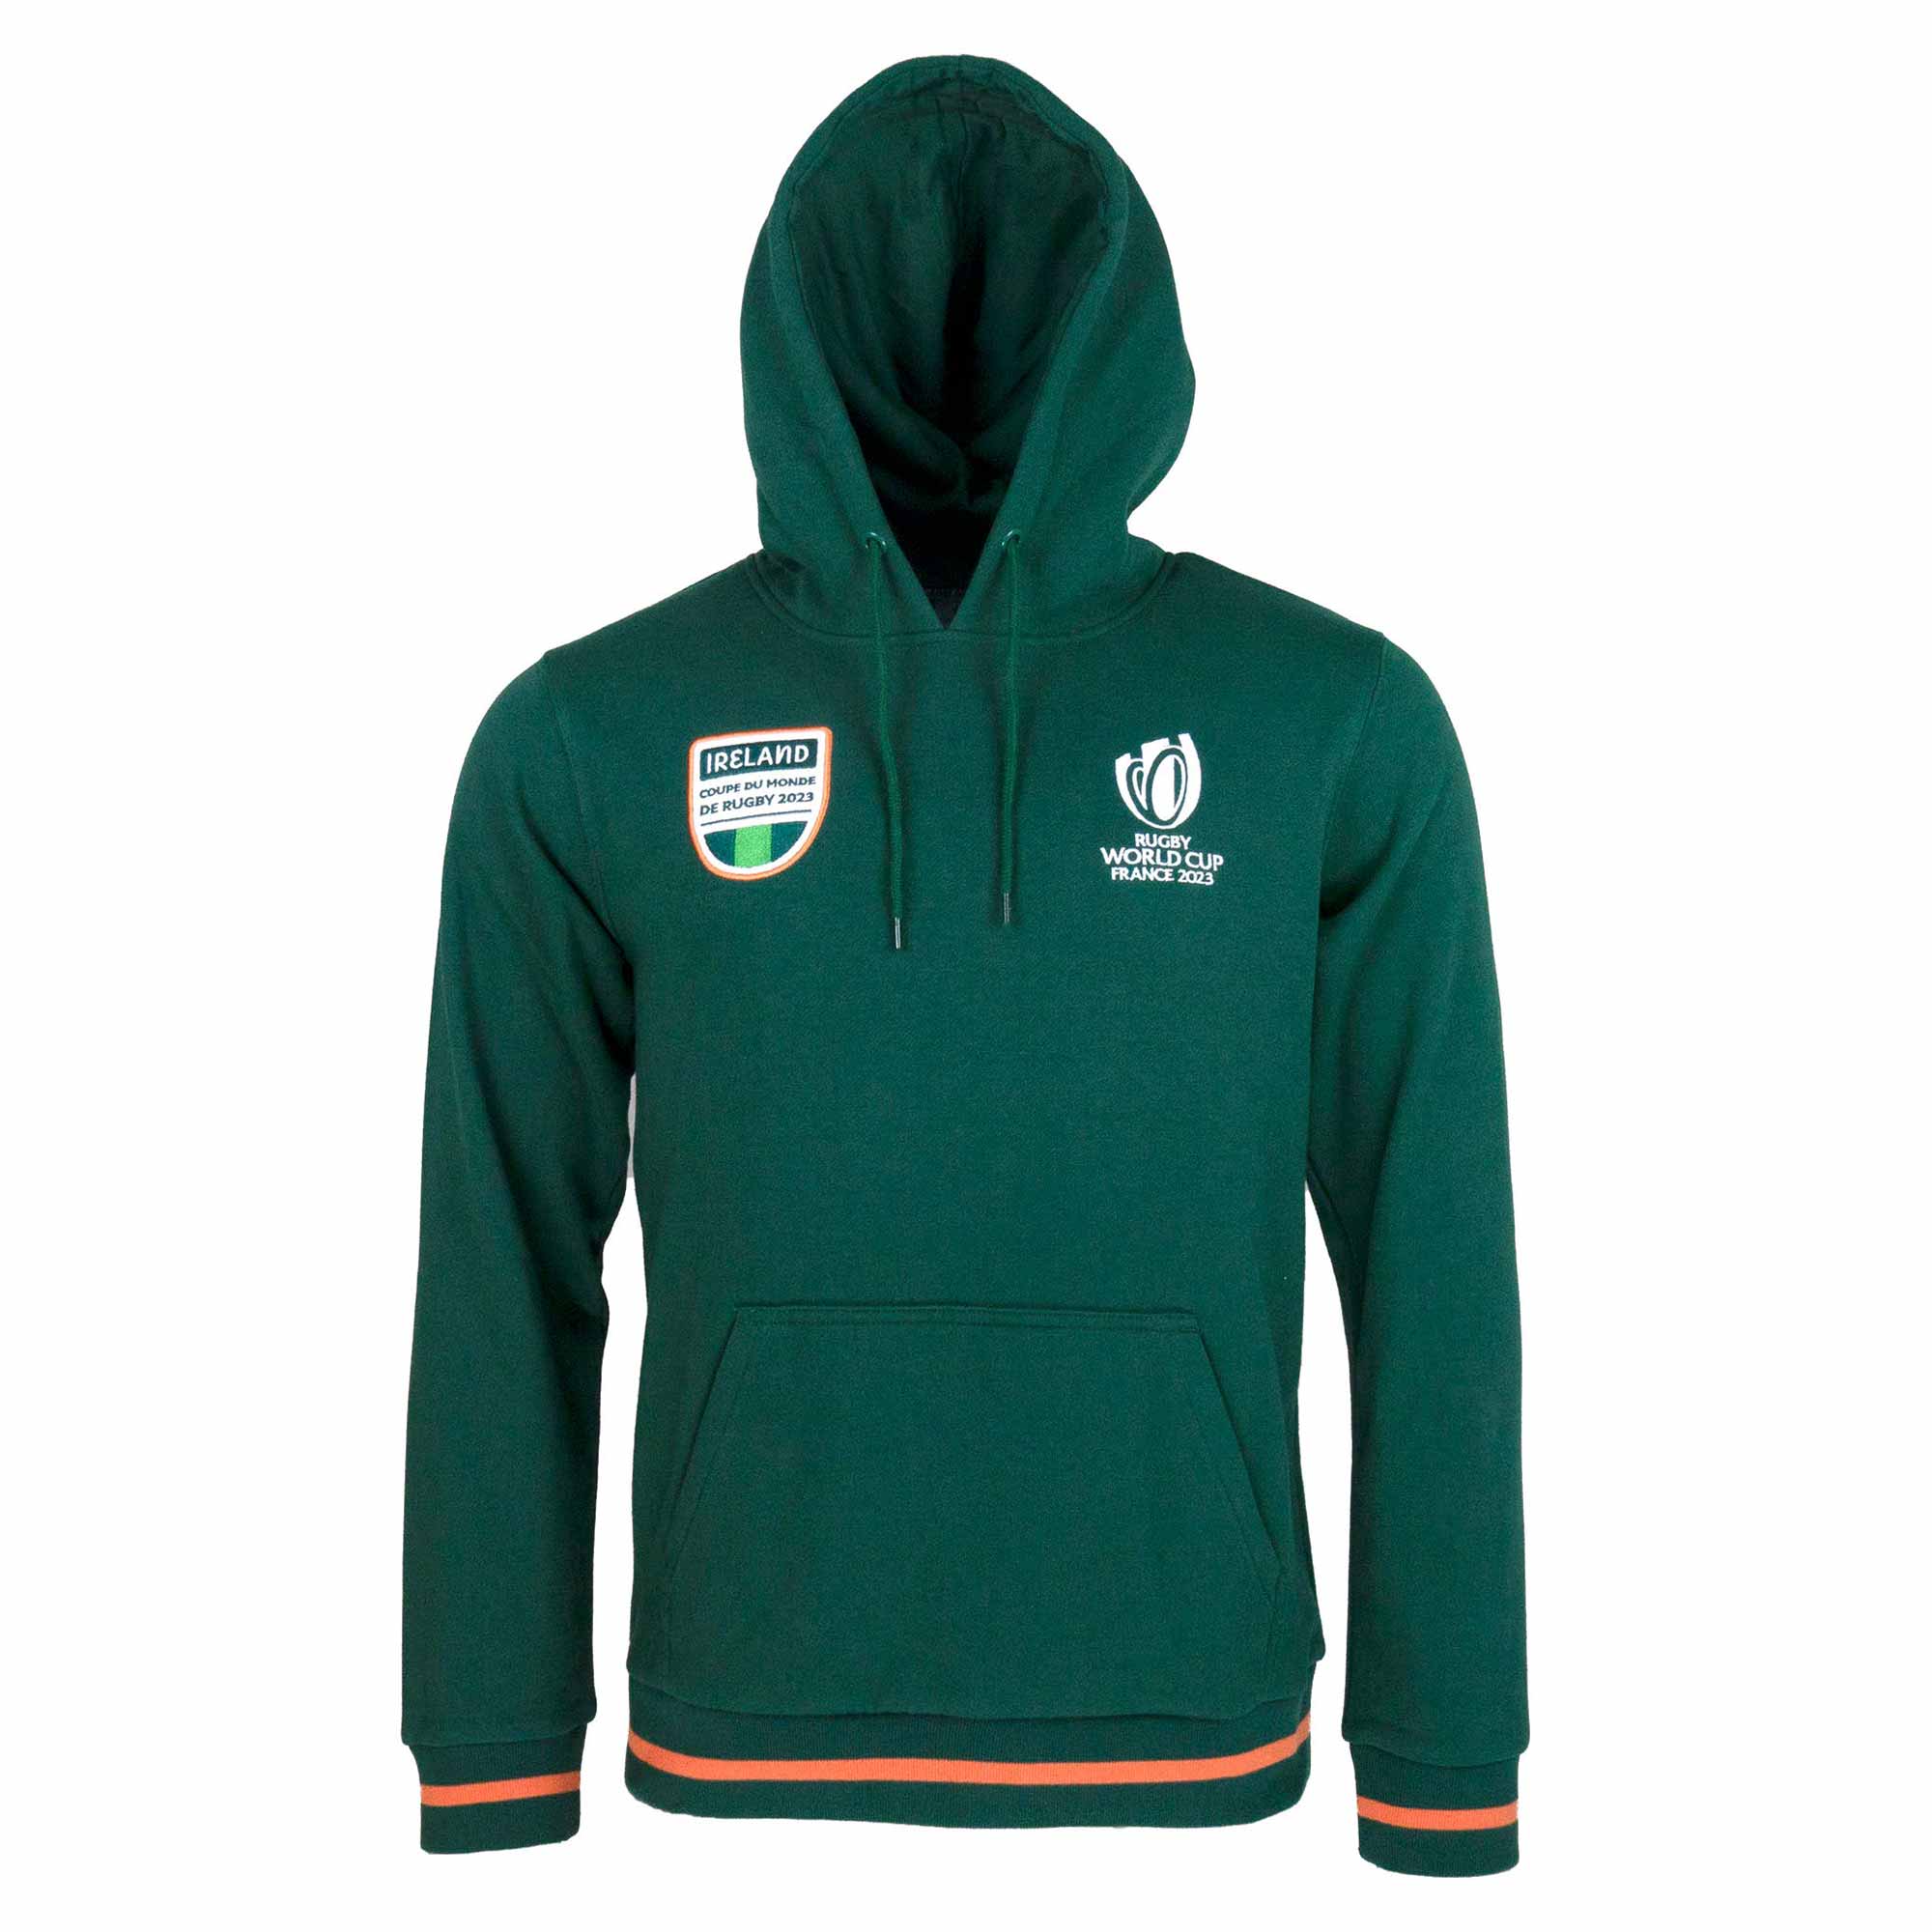 Image of Rugby World Cup 23 Ireland Supporters Hoody